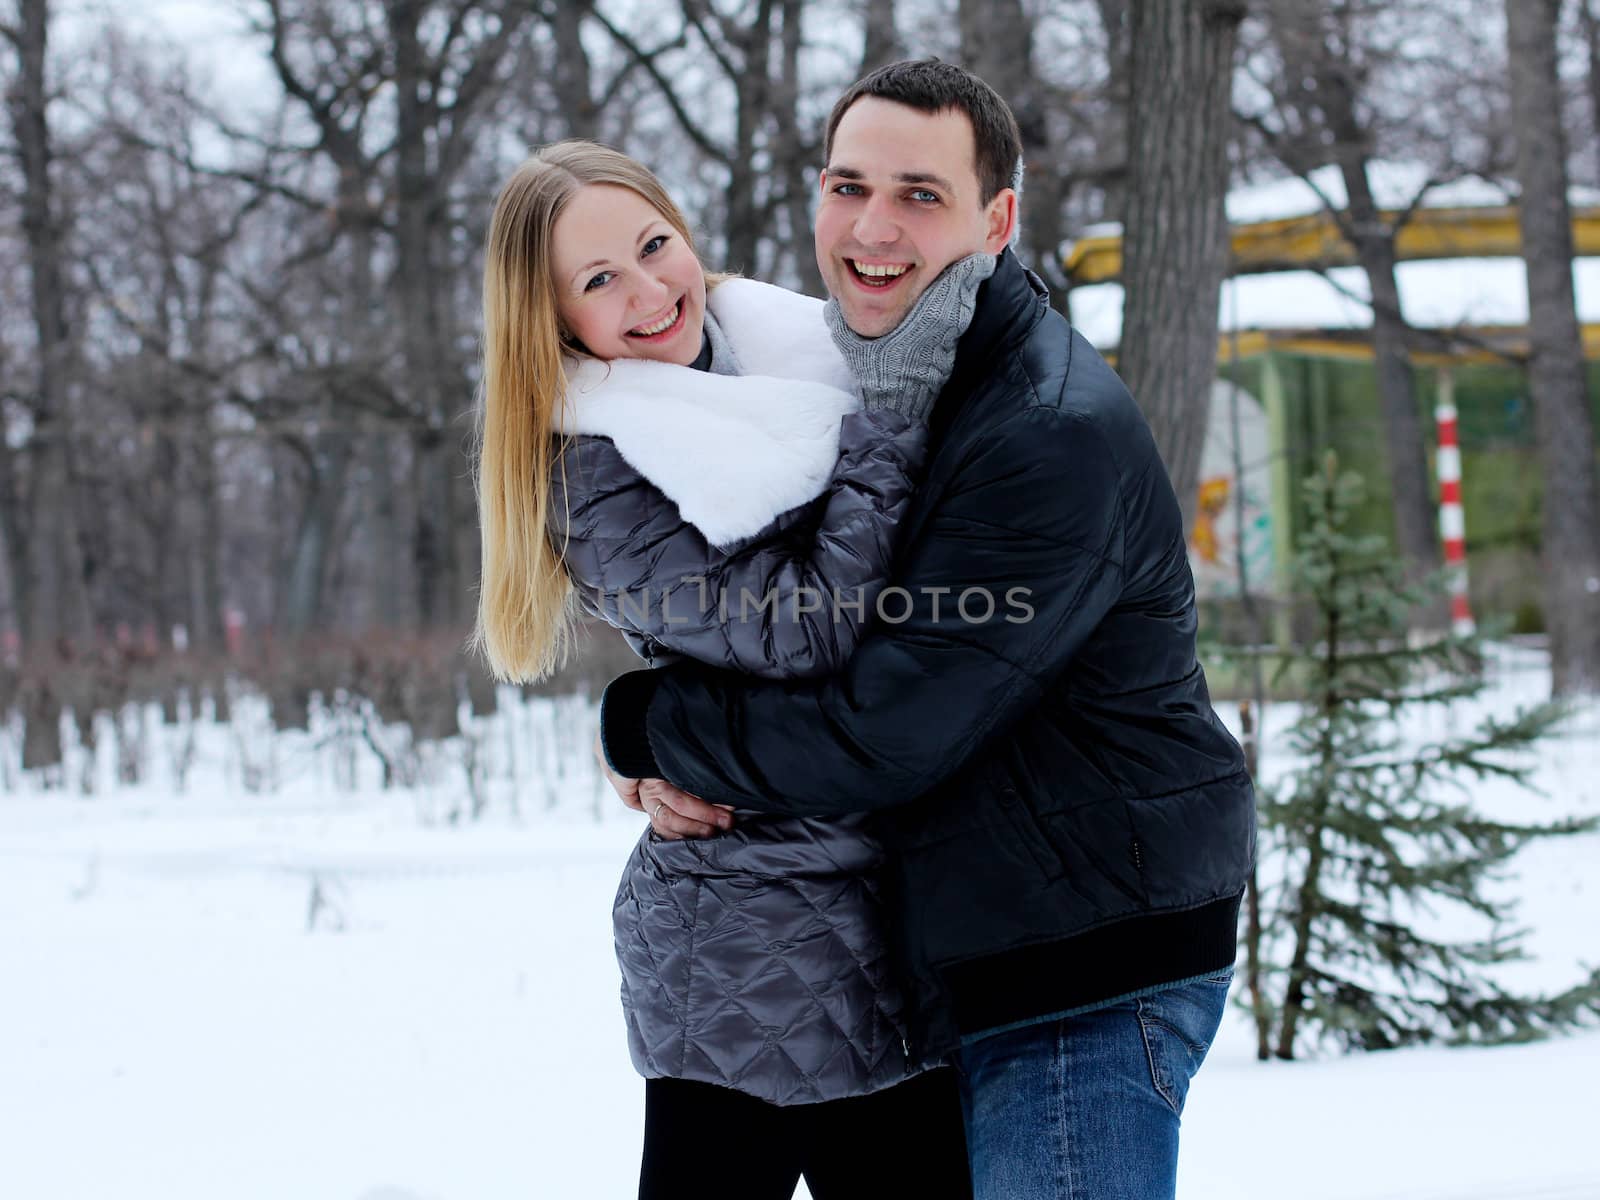 Portrait of a happy young couple